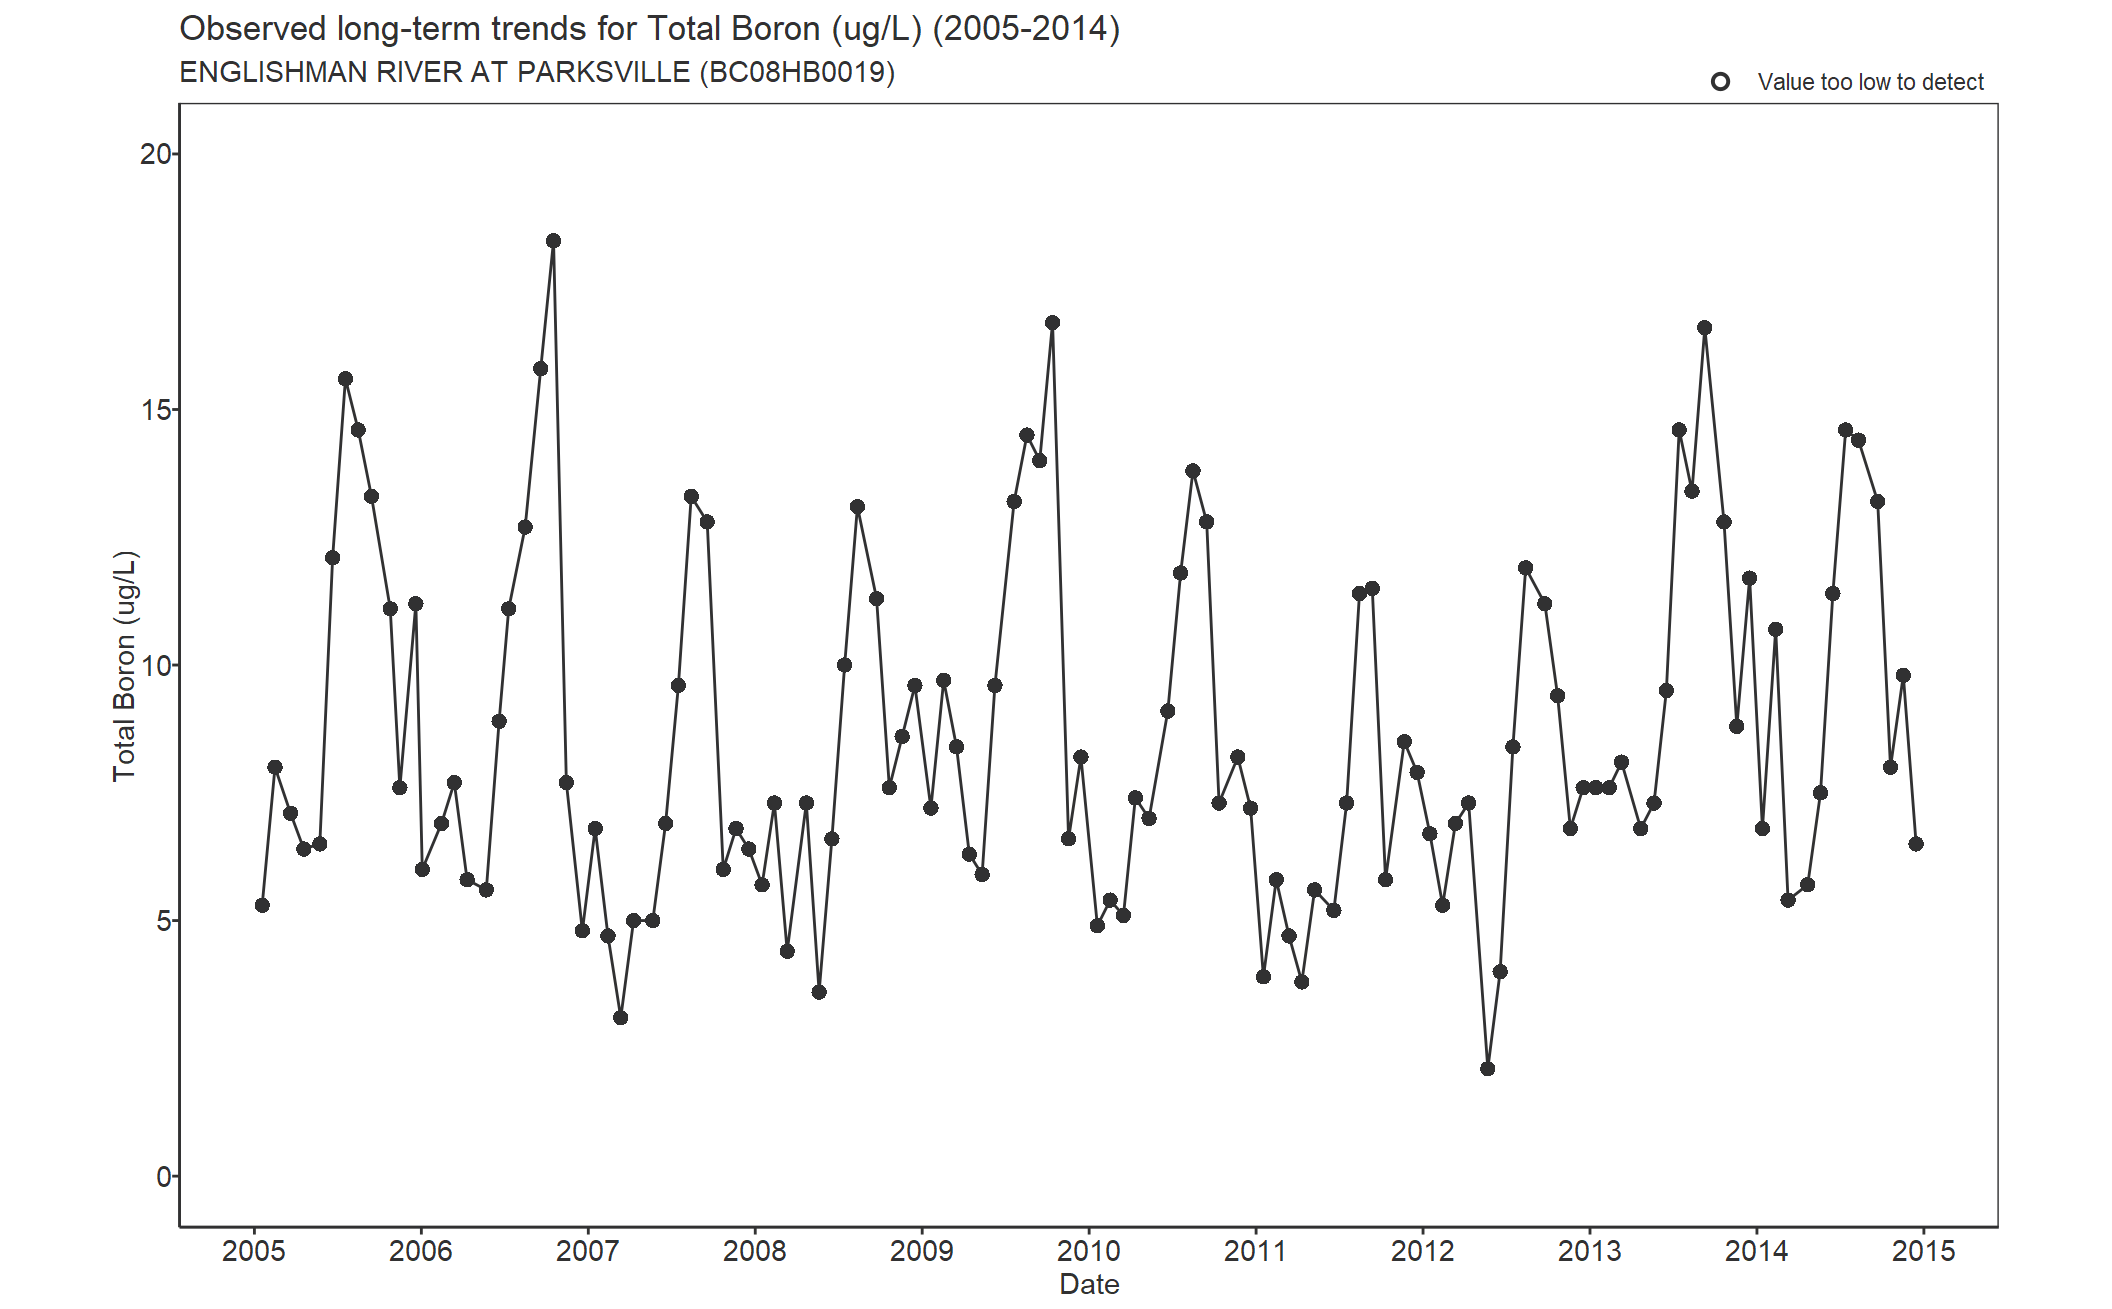 Observed long-term trends for Total Boron (2005-2014)